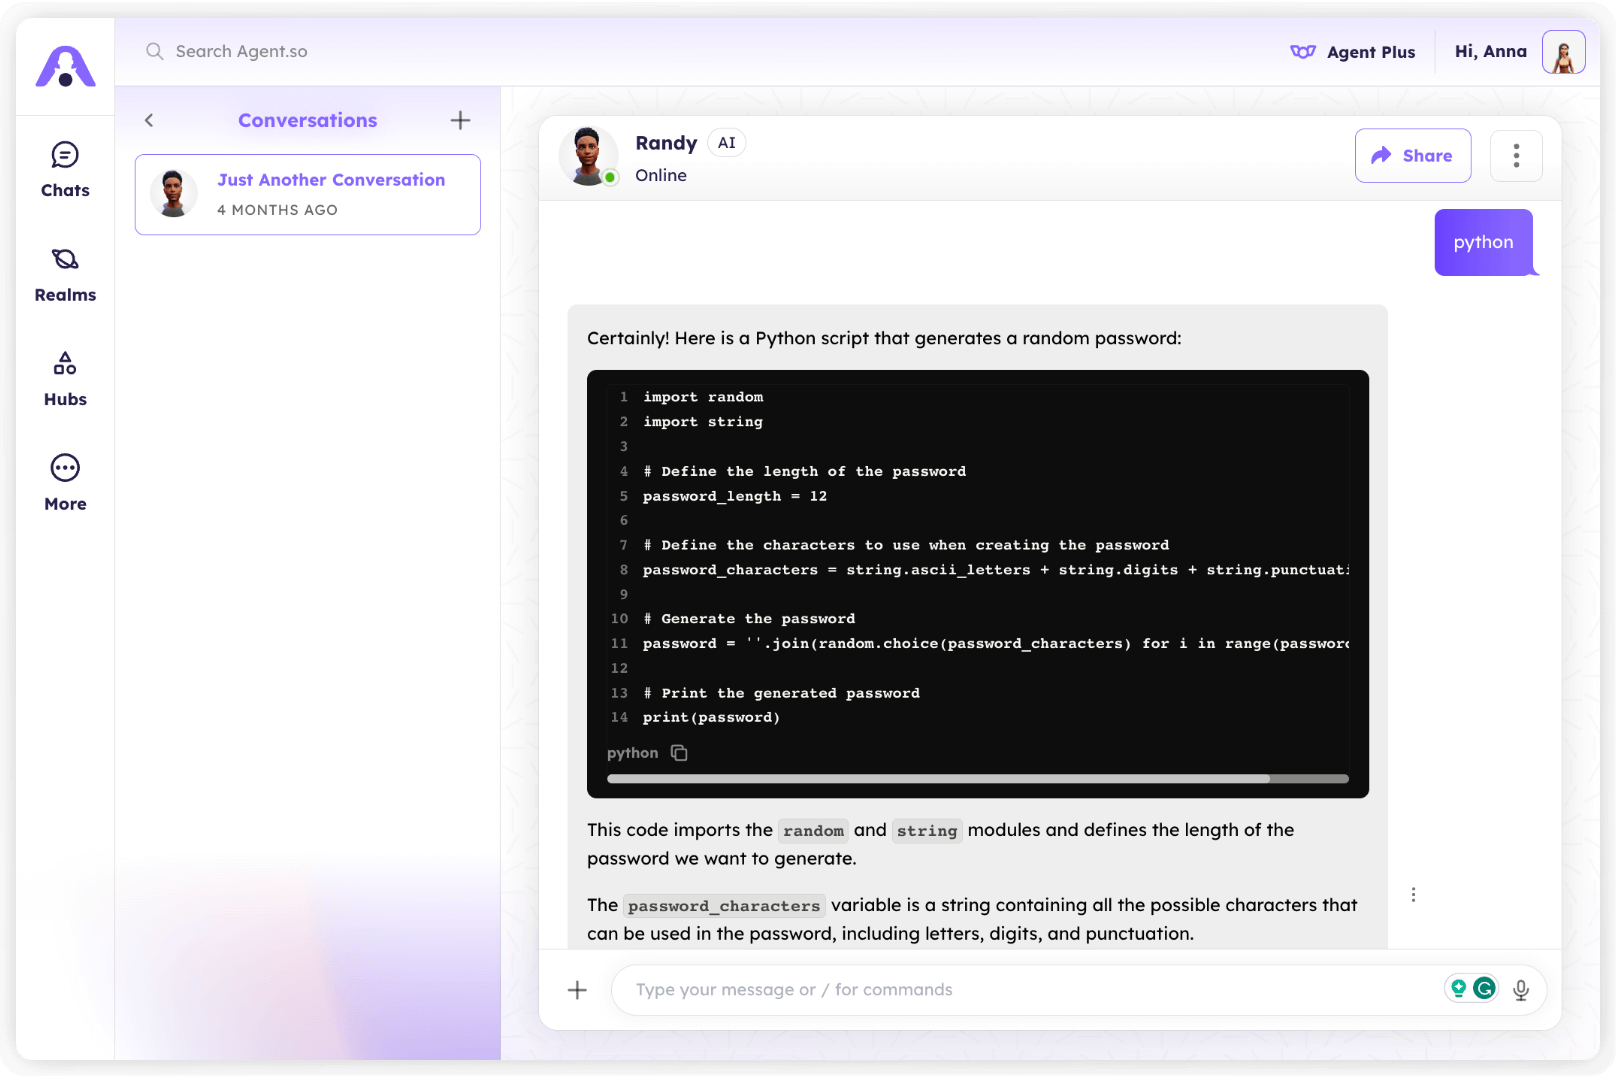 A screenshot of the Agent.so "Chat with Zephyr, Your Personal AI Cybersecurity Expert for Free" Page